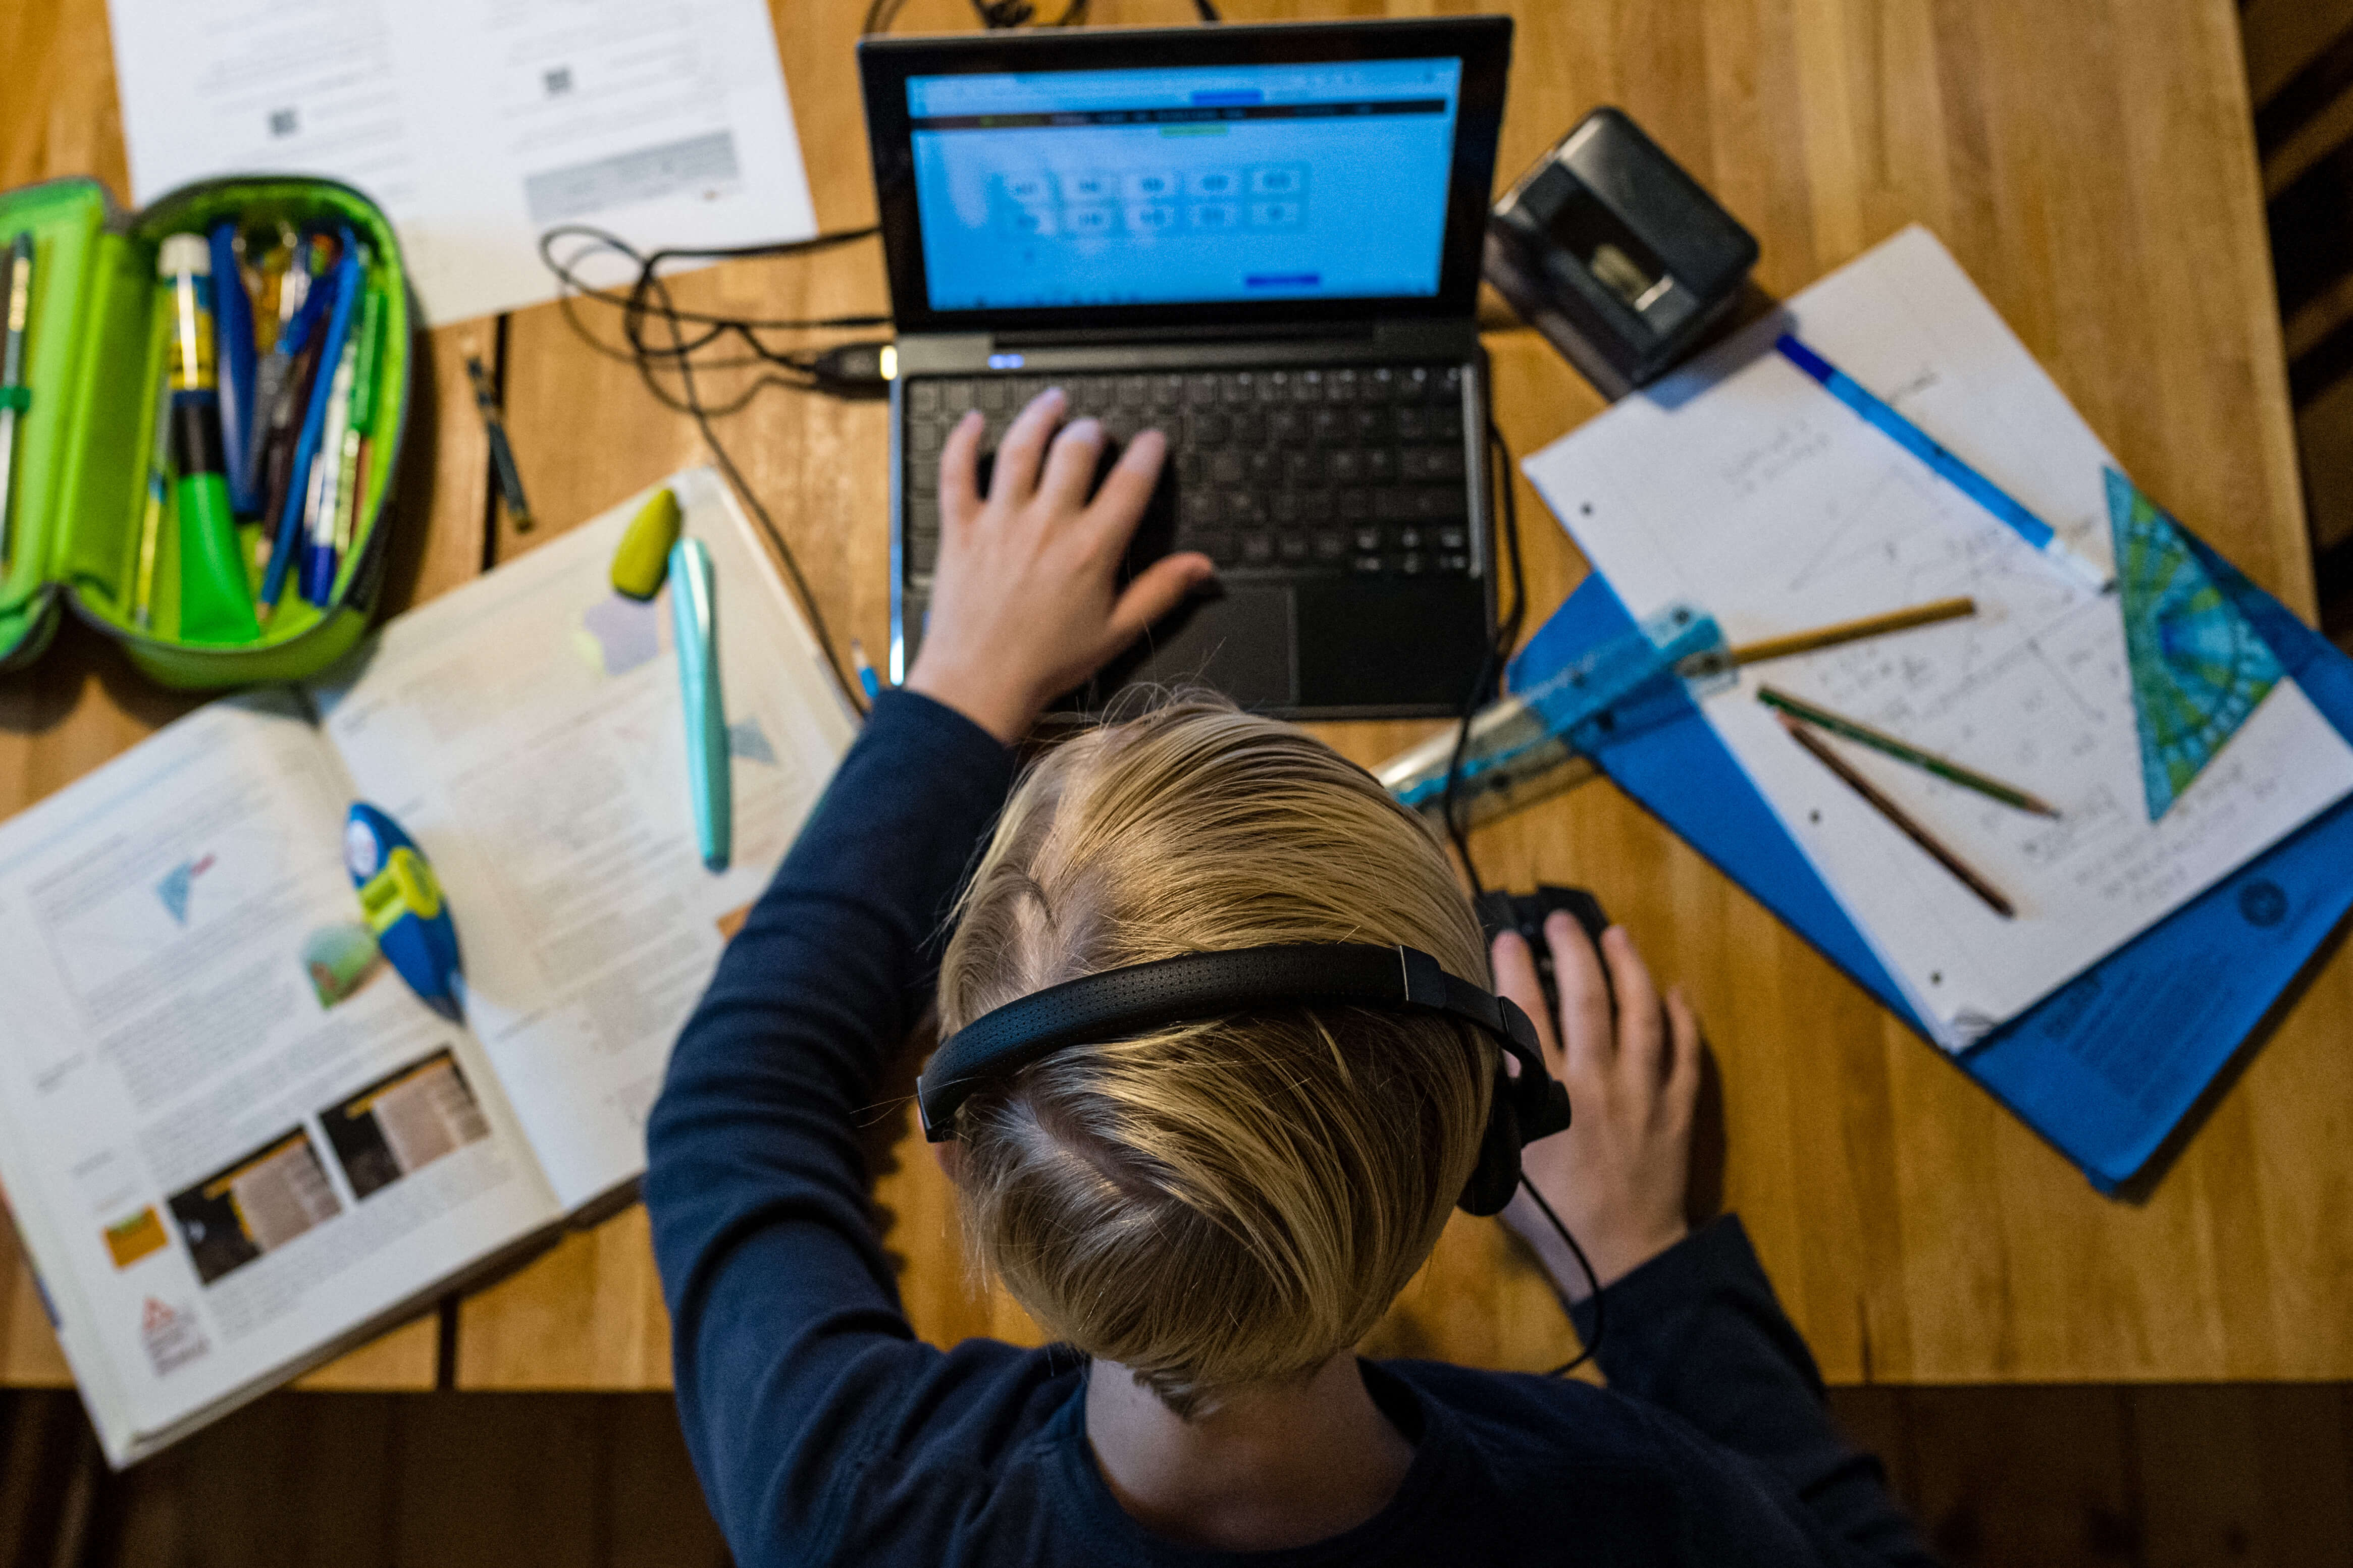 Private schools are winning as US scrambles with remote learning once more